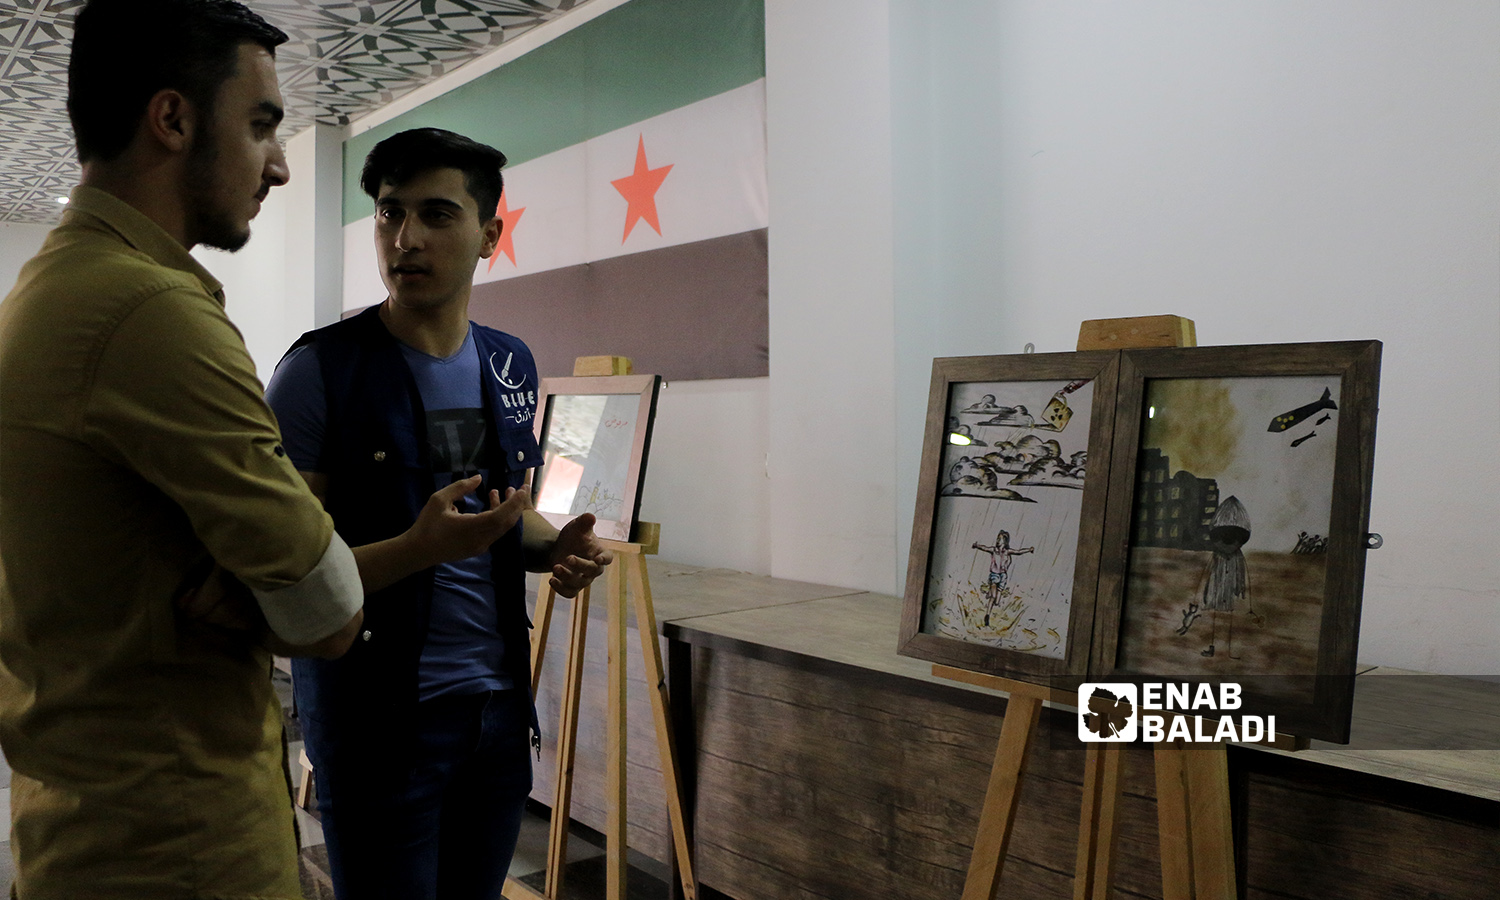 An art exhibition under the slogan “Do Not Suffocate Truth” was held in Azaz city in Aleppo governorate in remembrance of the Eastern Ghouta’s chemical massacre - 21 August 2021 (Enab Baladi / Walid Othman)
